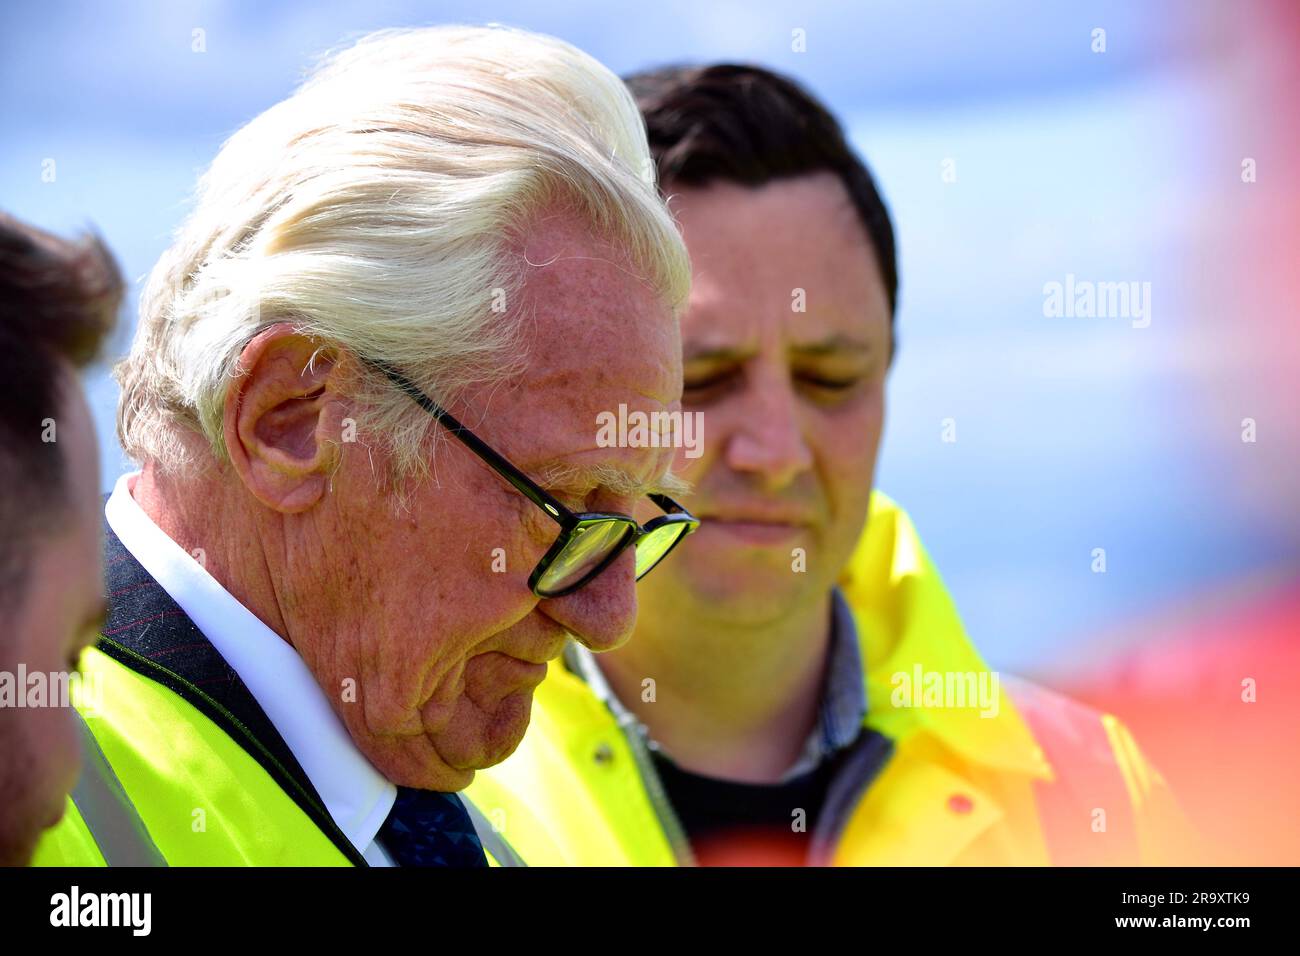 Redcar, UK. 29 Jun 2023. Lord Michael Heseltine pictured after detonating the final scheduled explosive blowdown on the Teesworks site today. This saw the former Redcar Steelworks Power Station and associated structures demolished - including a triple flare stack, the power station building, chimney, and gas holder, making way for redevelopment. Lord Michael Heseltine pressed the button to trigger the explosive demolition. Tees Valley Mayor Ben Houchen and Redcar MP Jacob Young were also present. The site is part of the Teesside Freeport and is currently being redeveloped, making way for new i Stock Photo